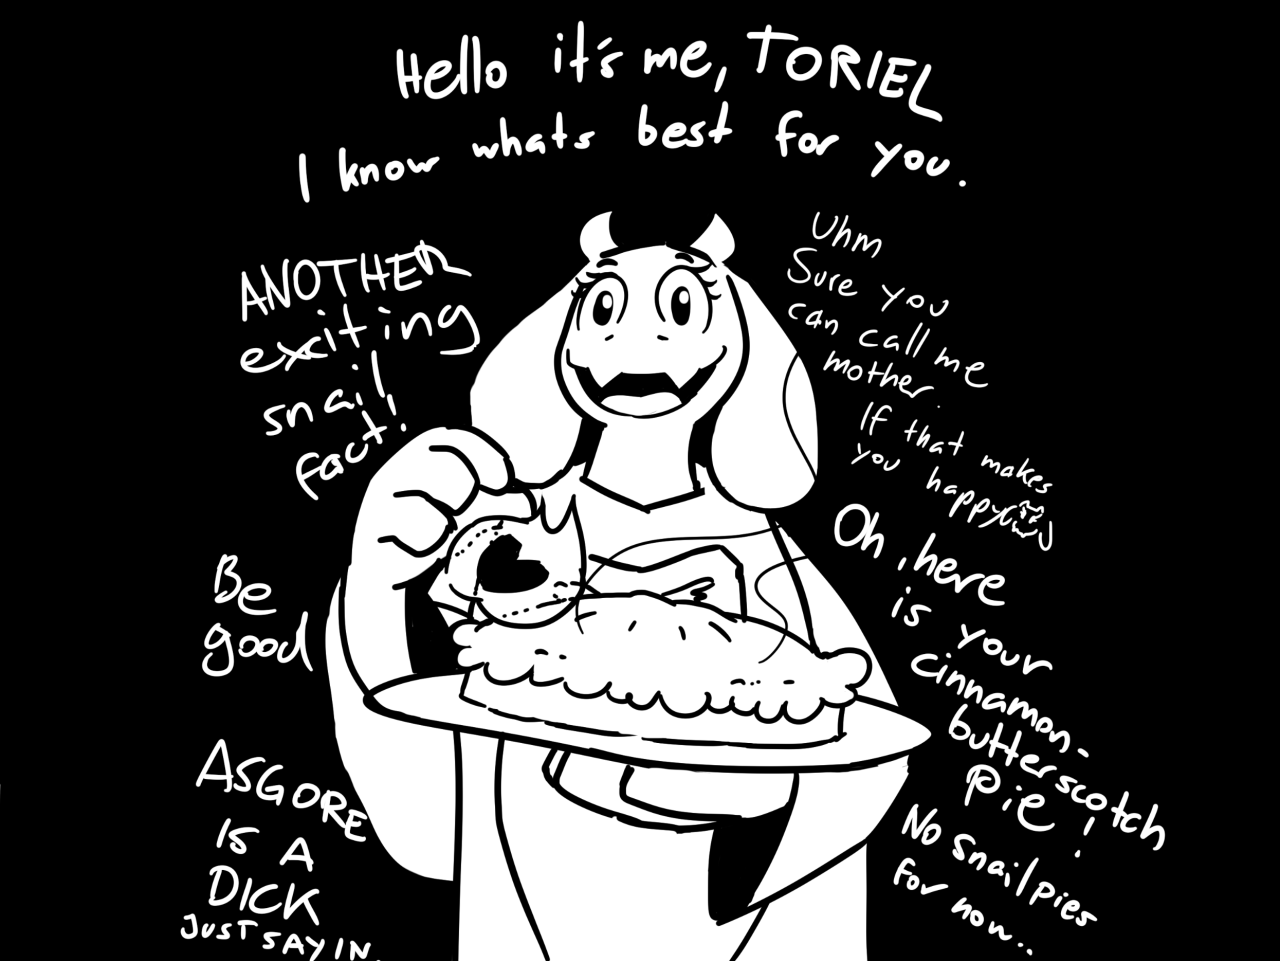 So yeah. Played this game. Undertale, what can I say. I was one of those guys that